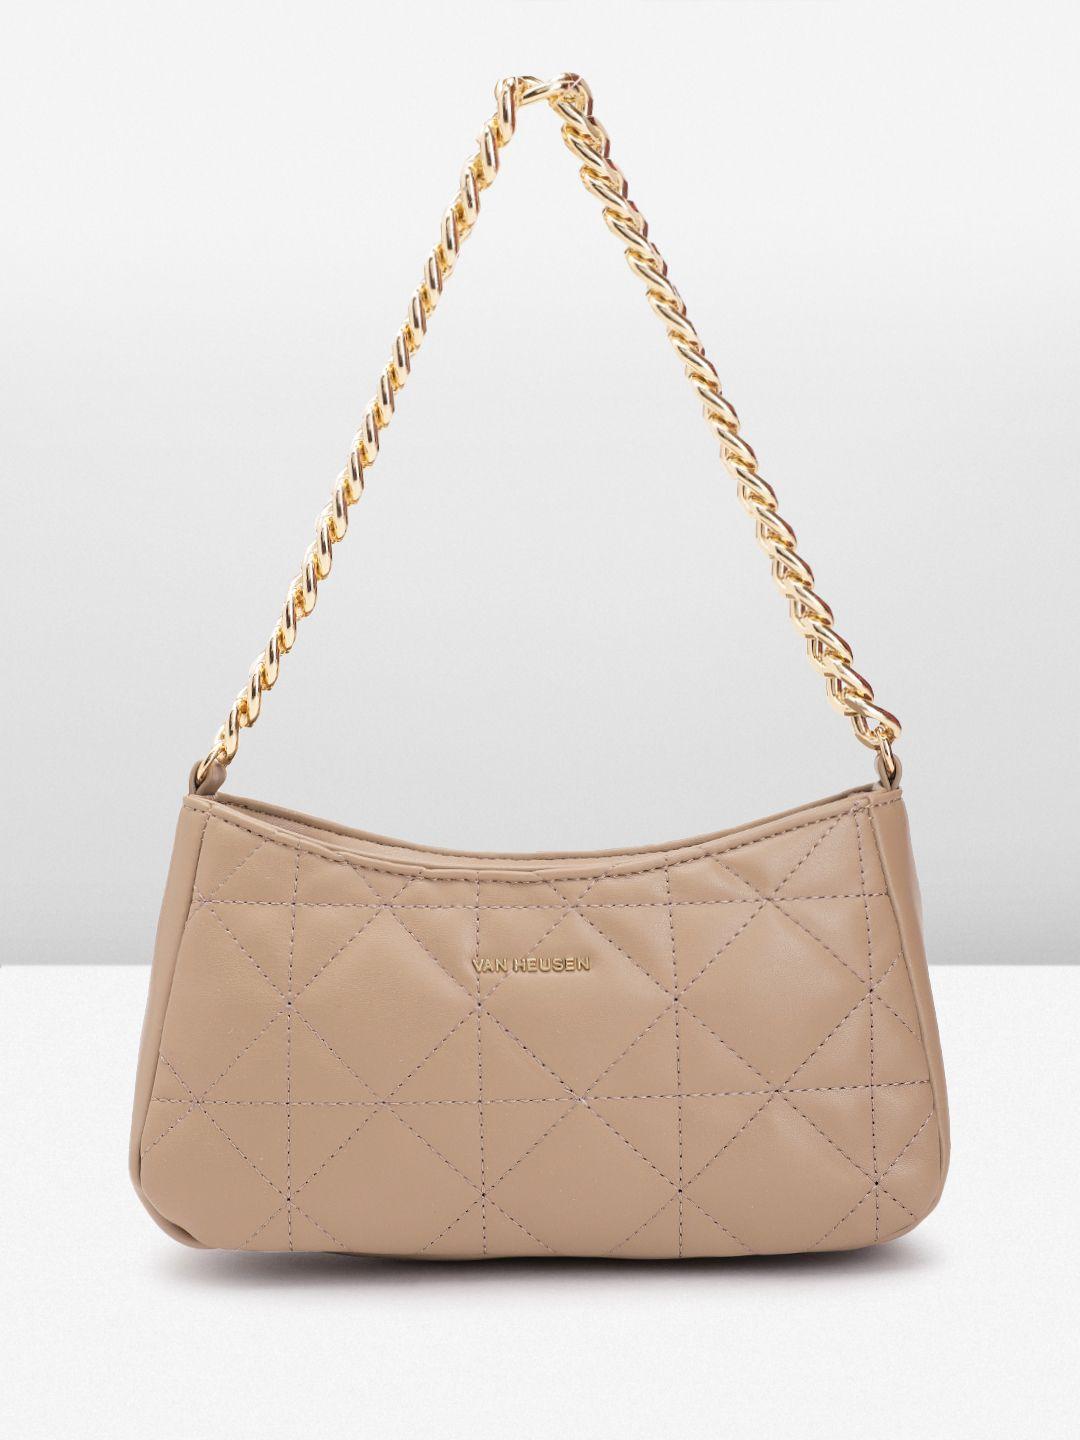 van heusen structured hobo bag with quilted detail